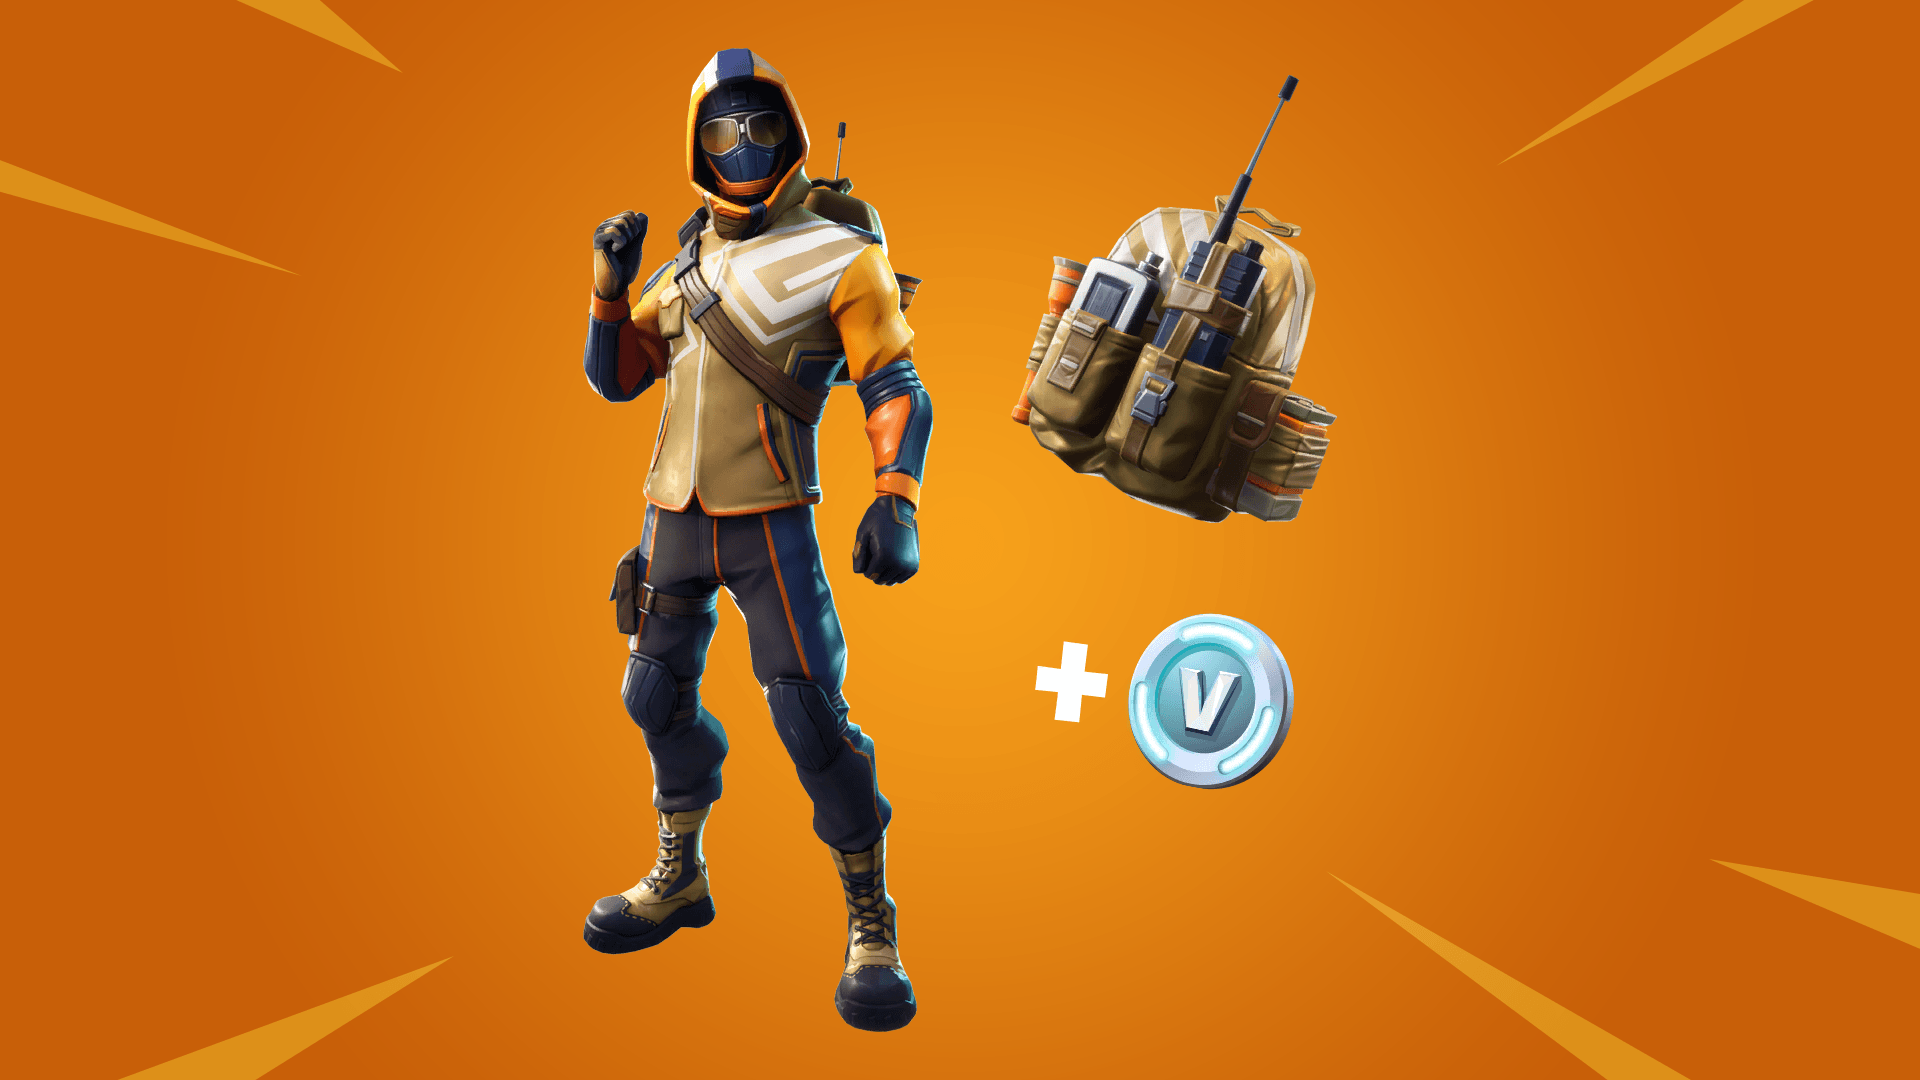 Summit Striker Starter Pack is now available in Fortnite: Battle